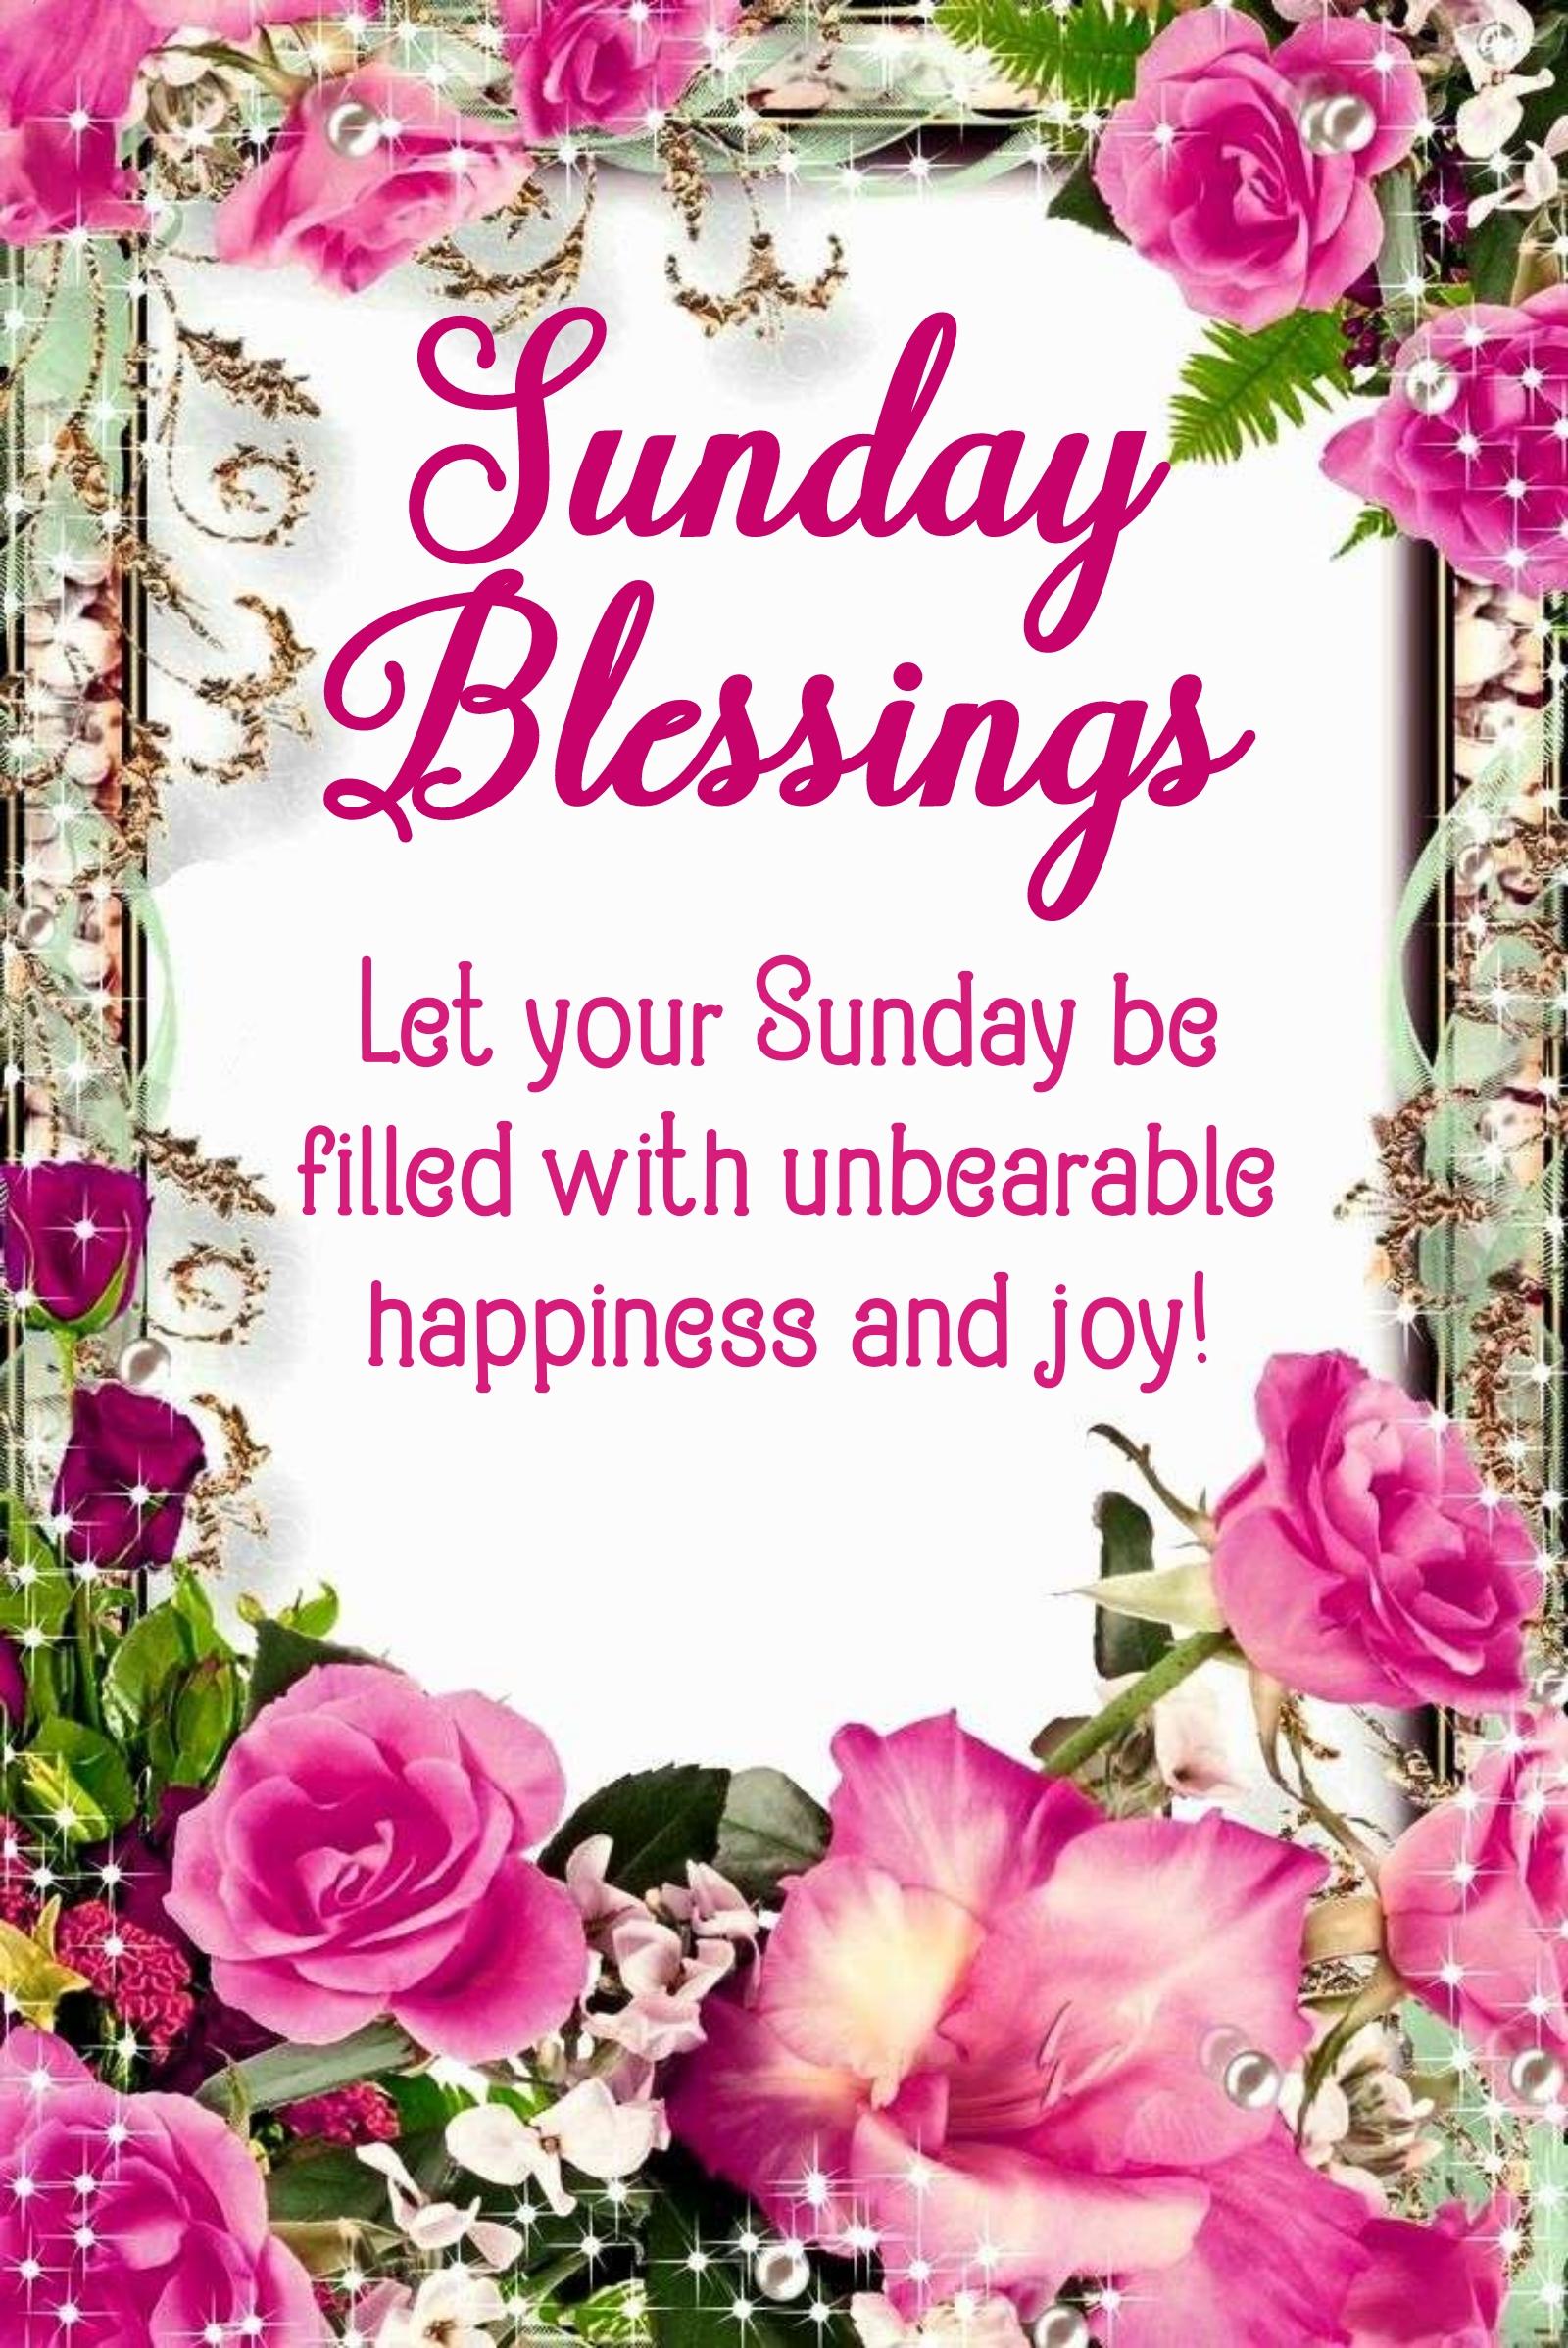 Let your Sunday be filled with unbearable happiness and joy!